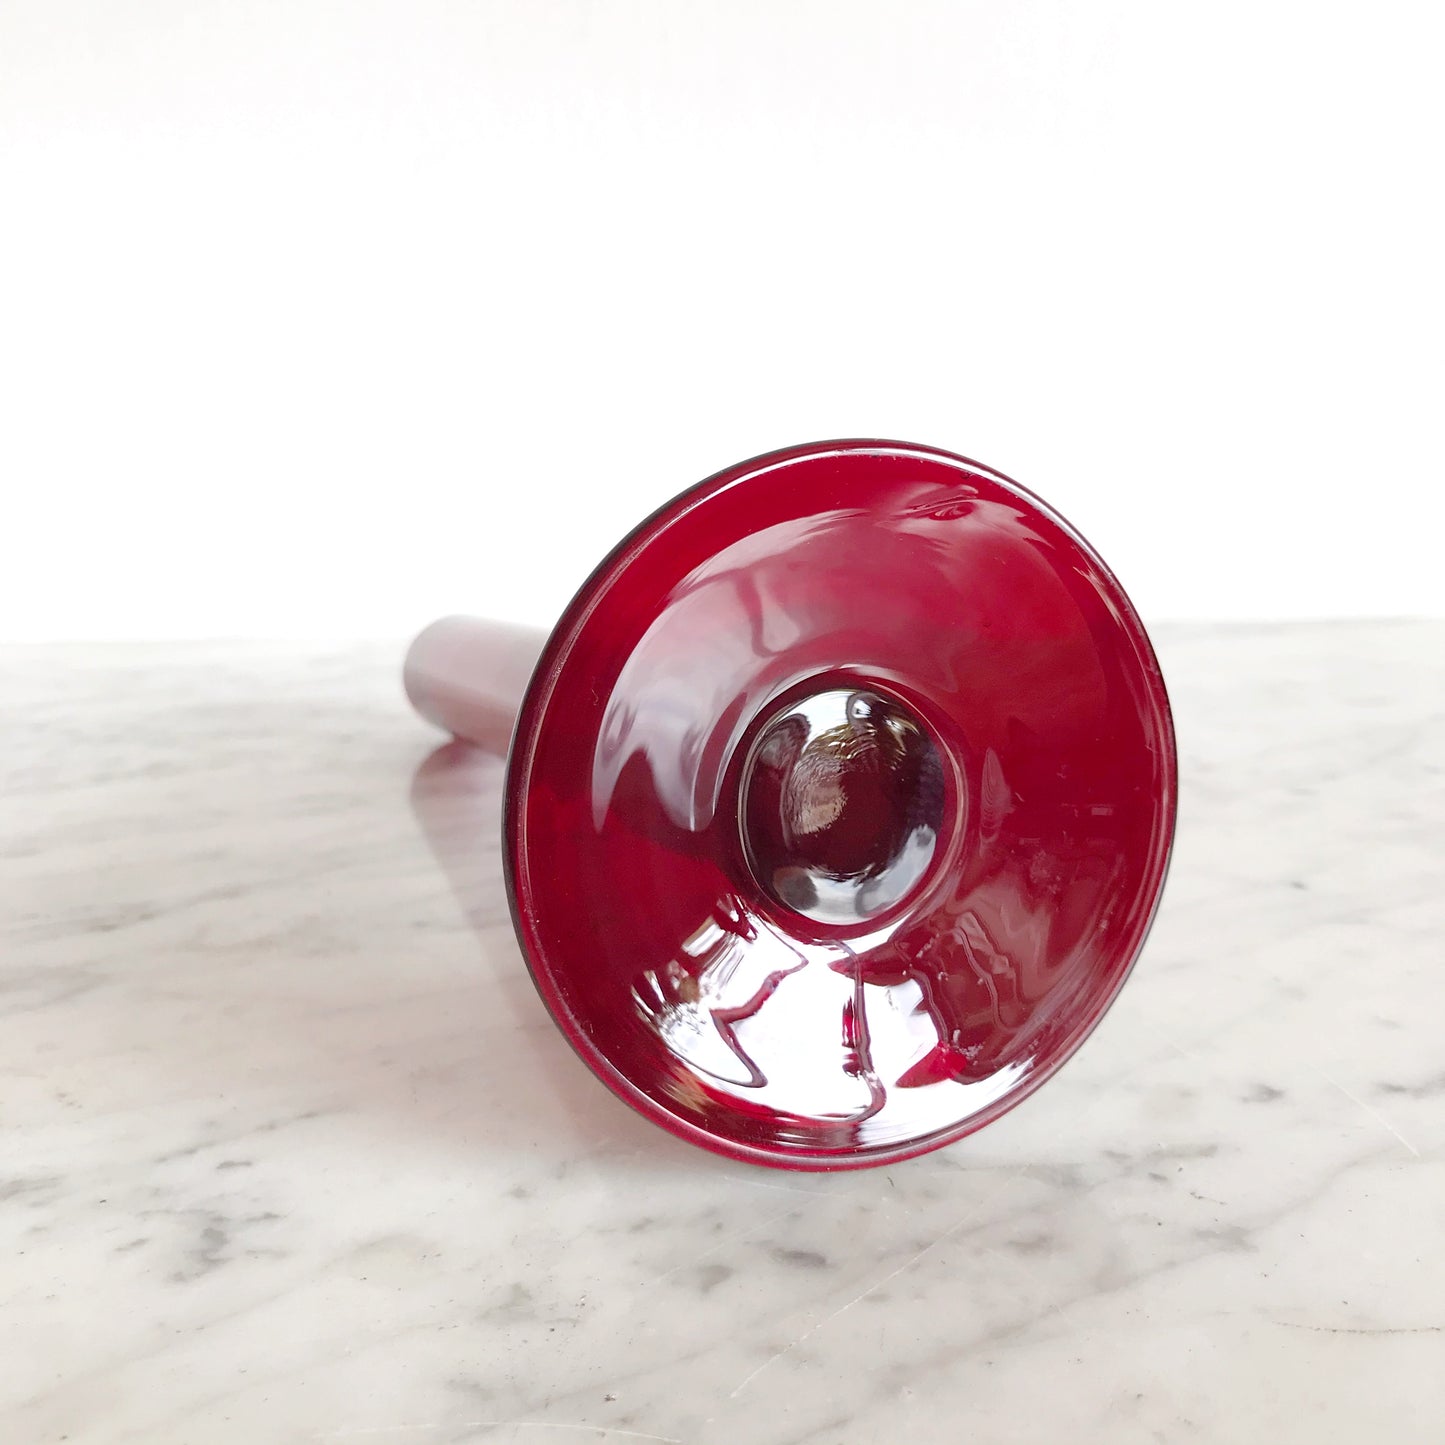 Tall Mod Red Glass Vase